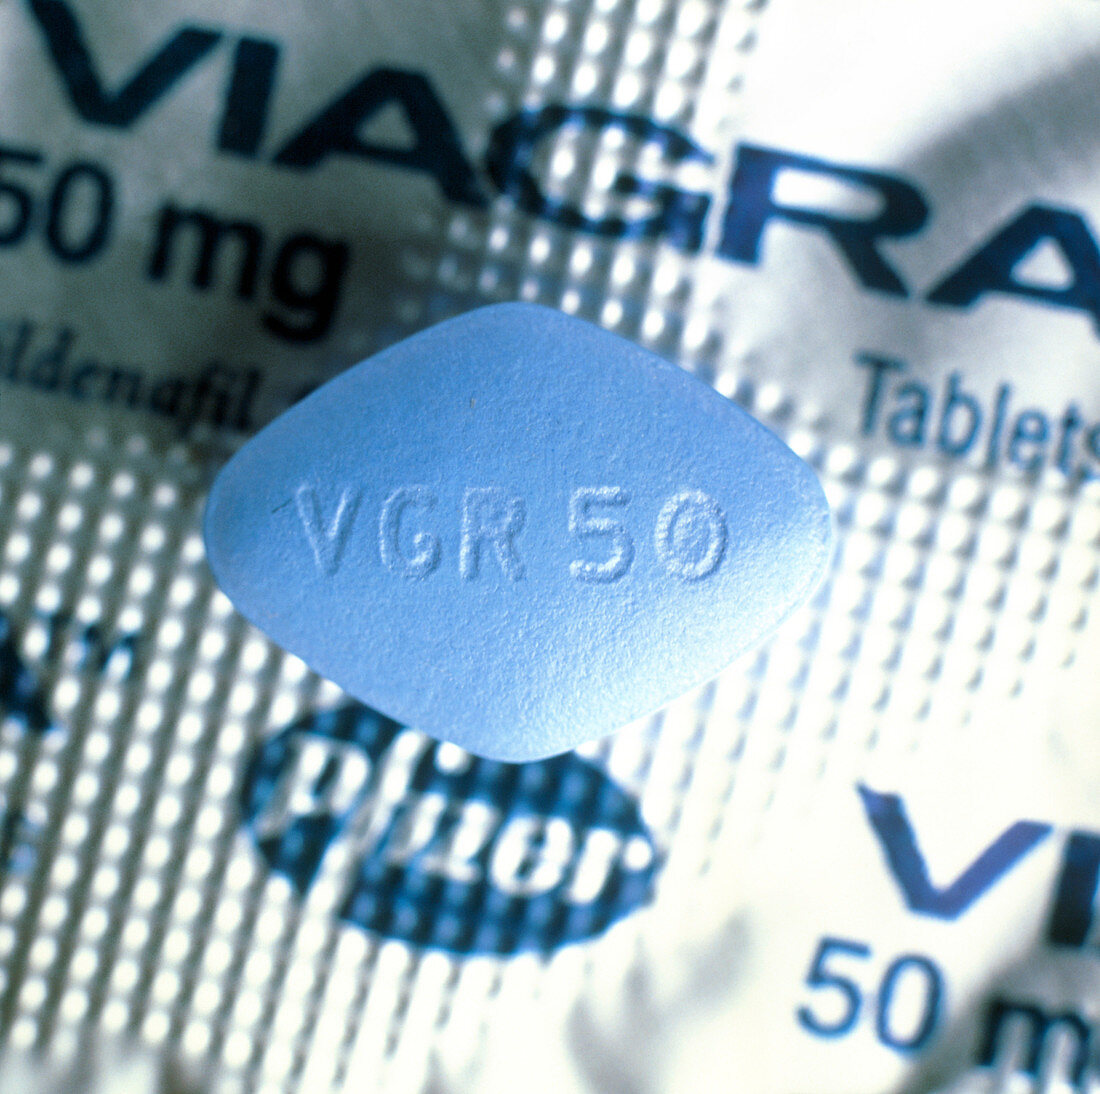 Blue Viagra pill and its metal foil packaging